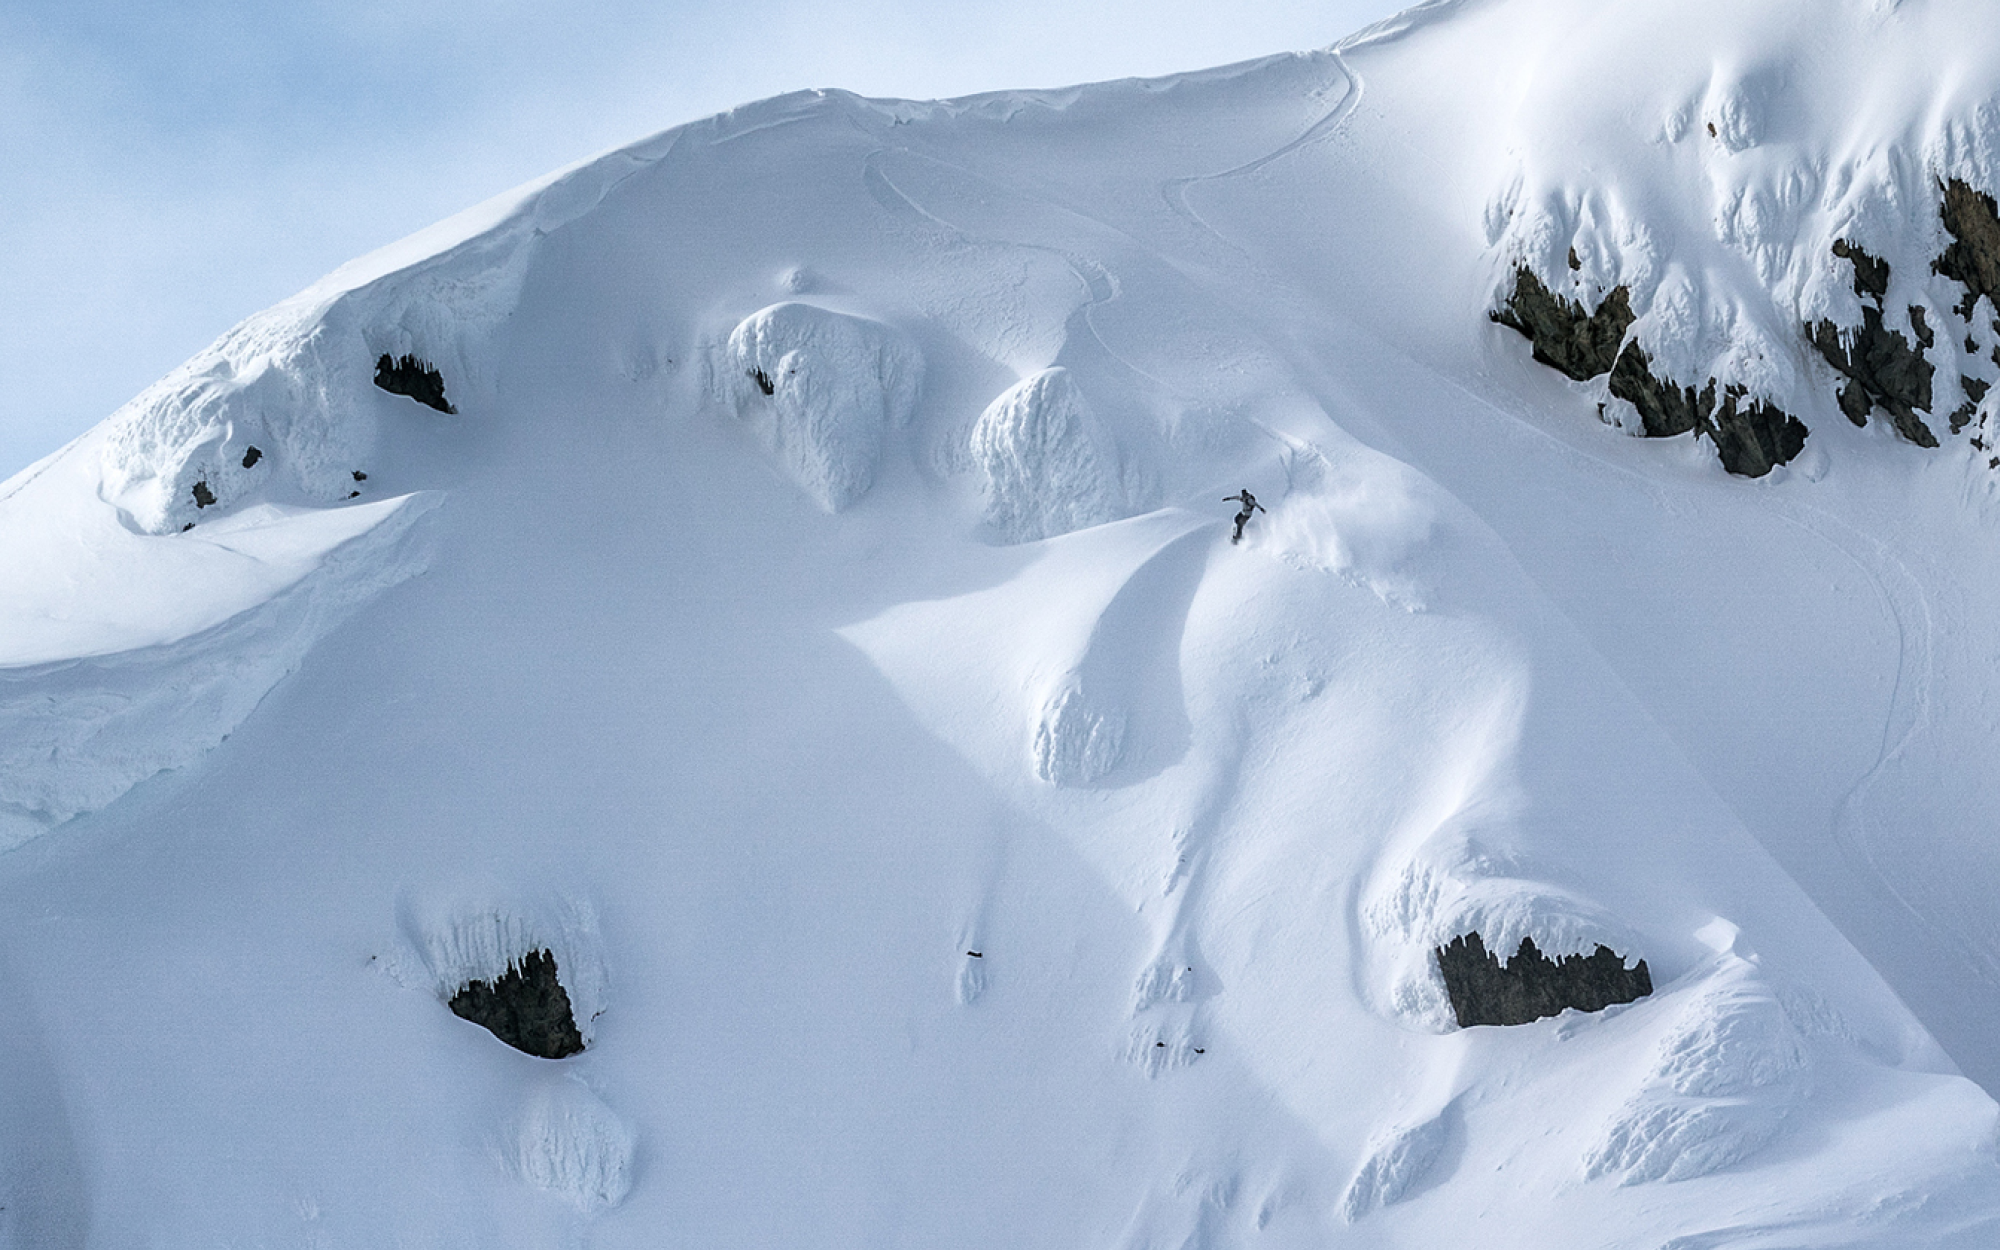 Bruce Johnston rides a beautiful line in the B.C. backcountry.